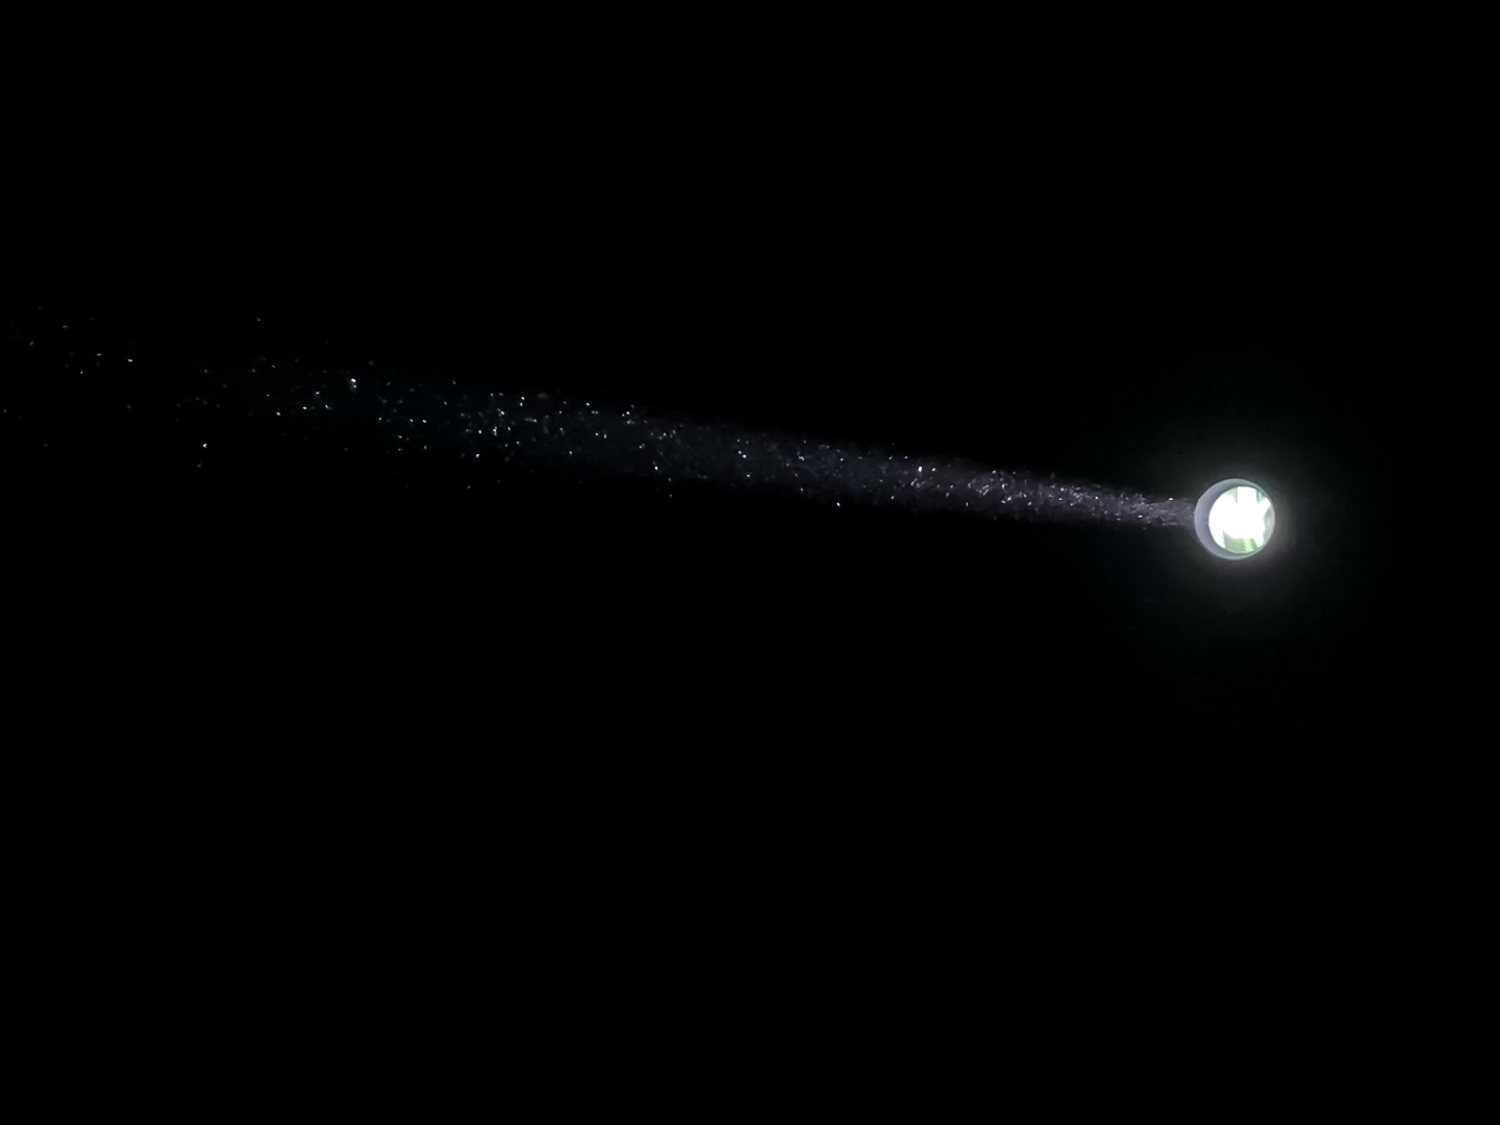 A dust-filled beam of light against a black background